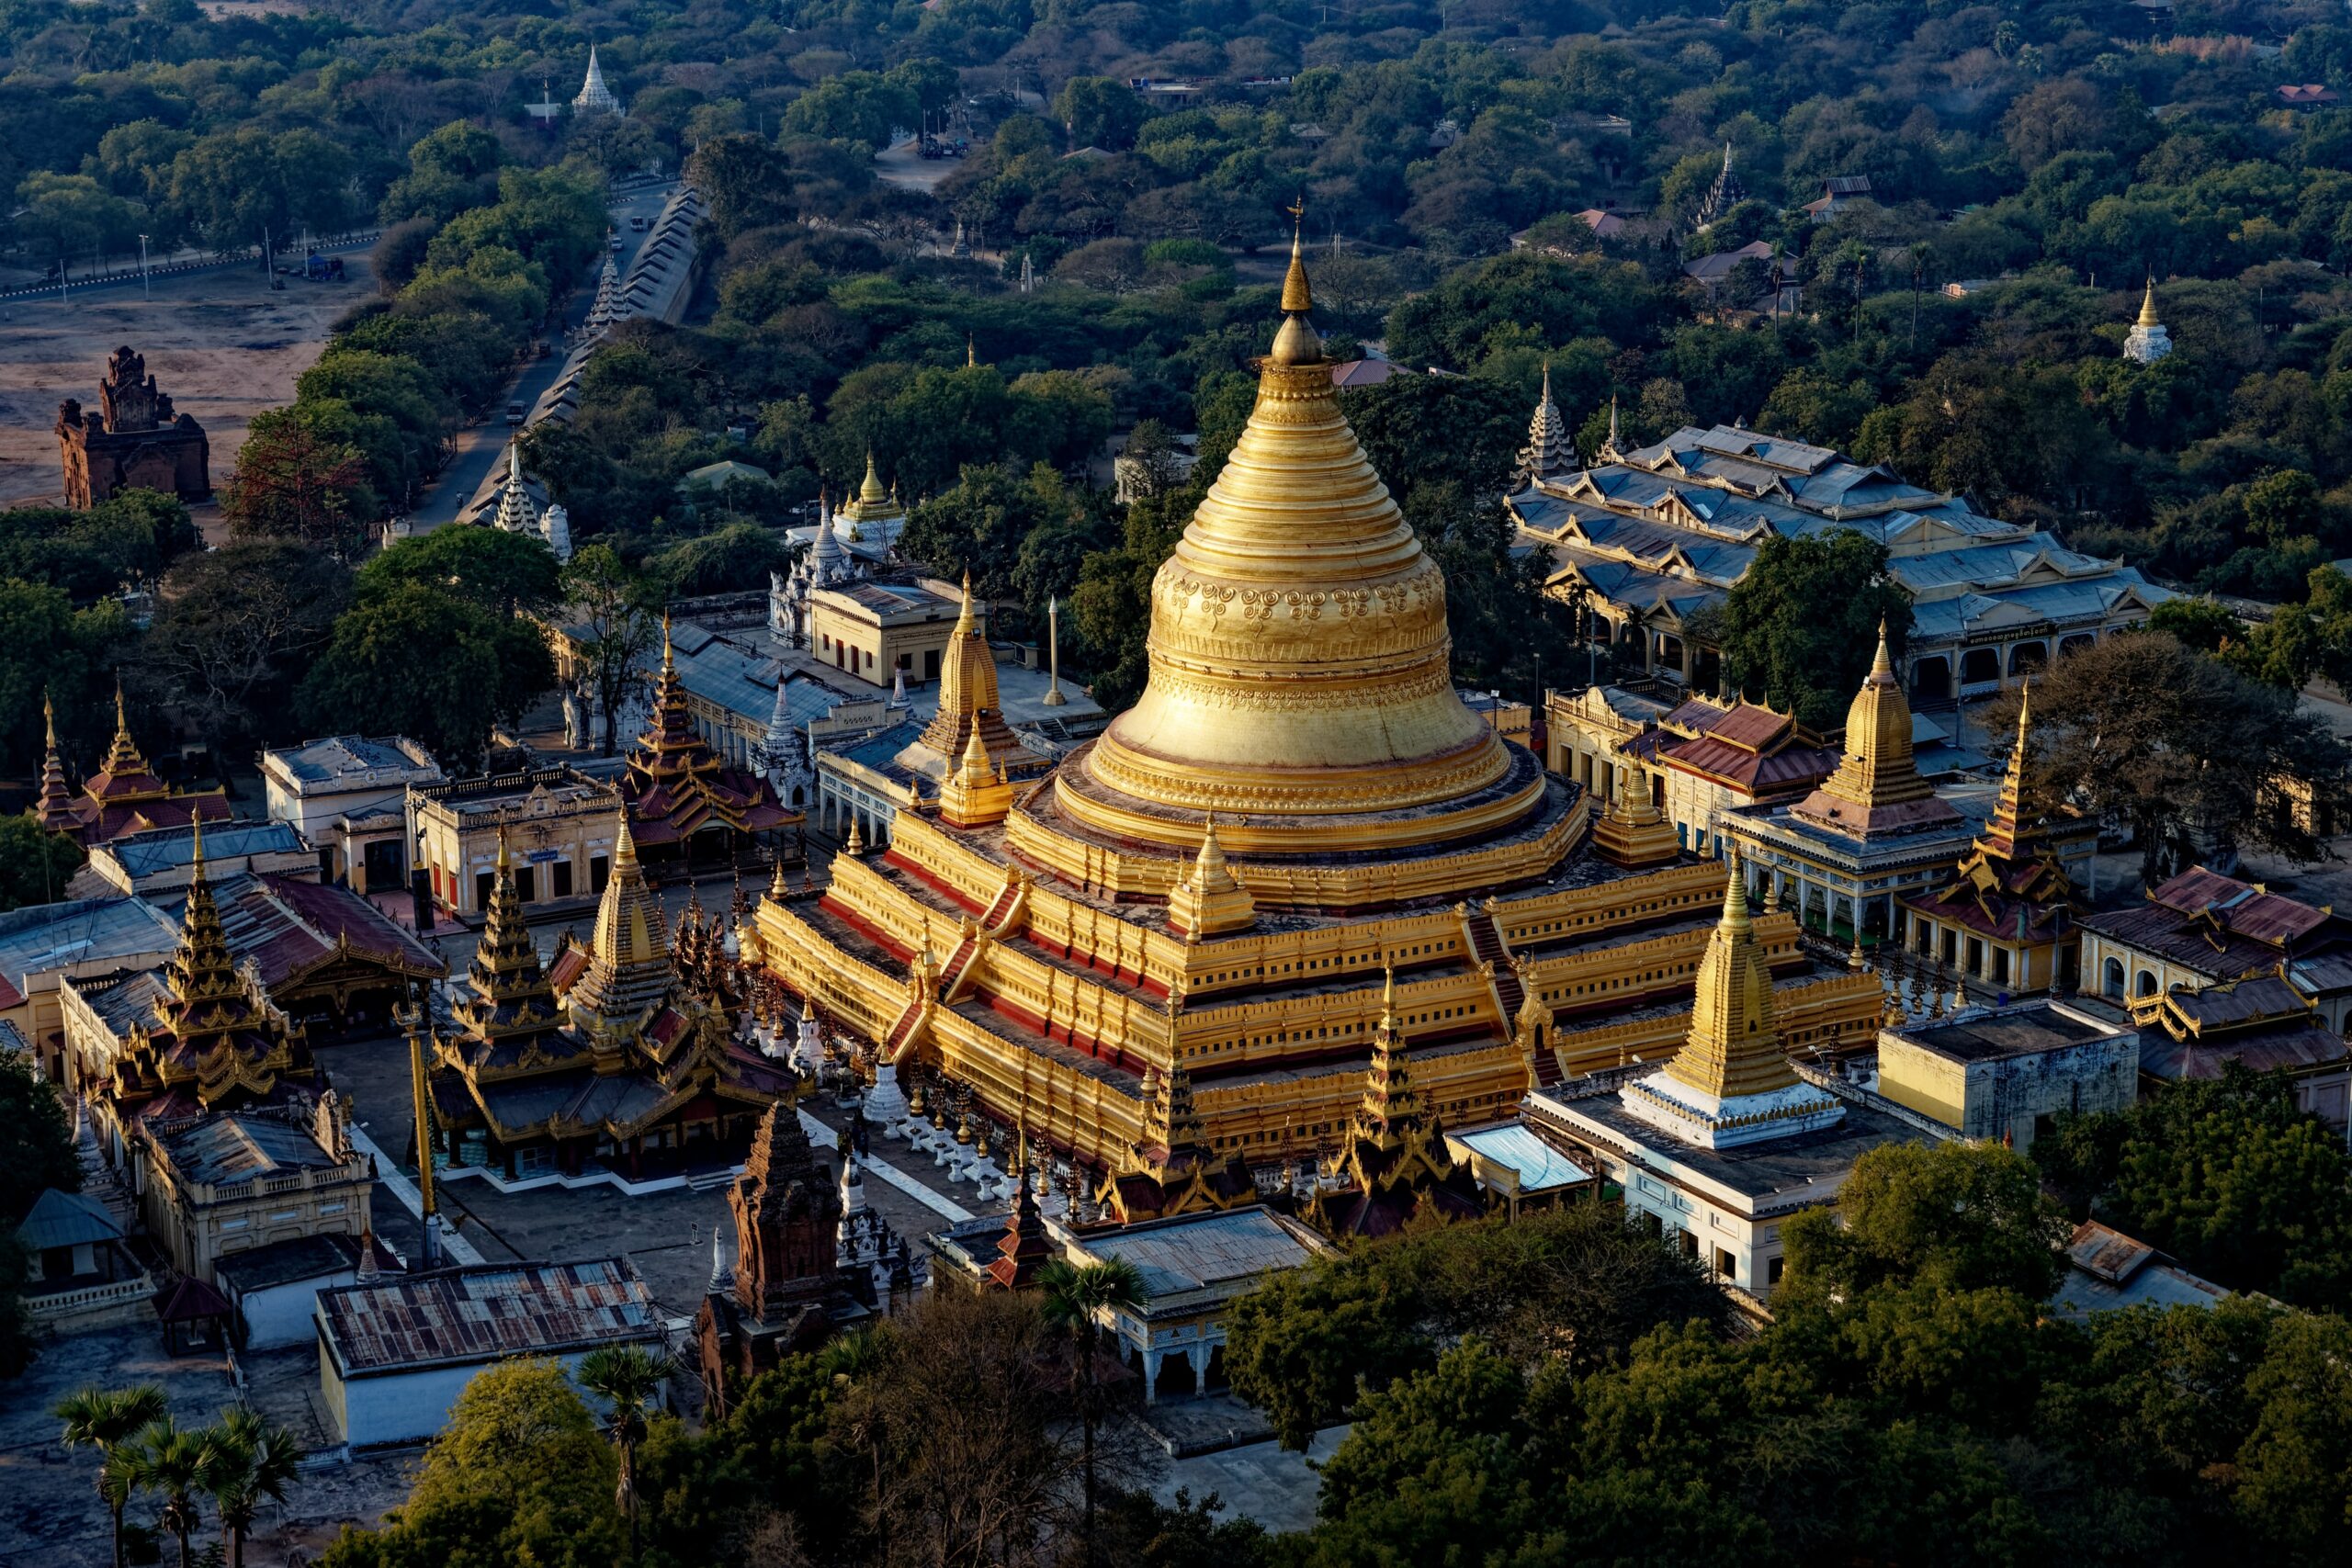 This is an aerial photograph of a temple in Myanmar. The roof is solid gold.